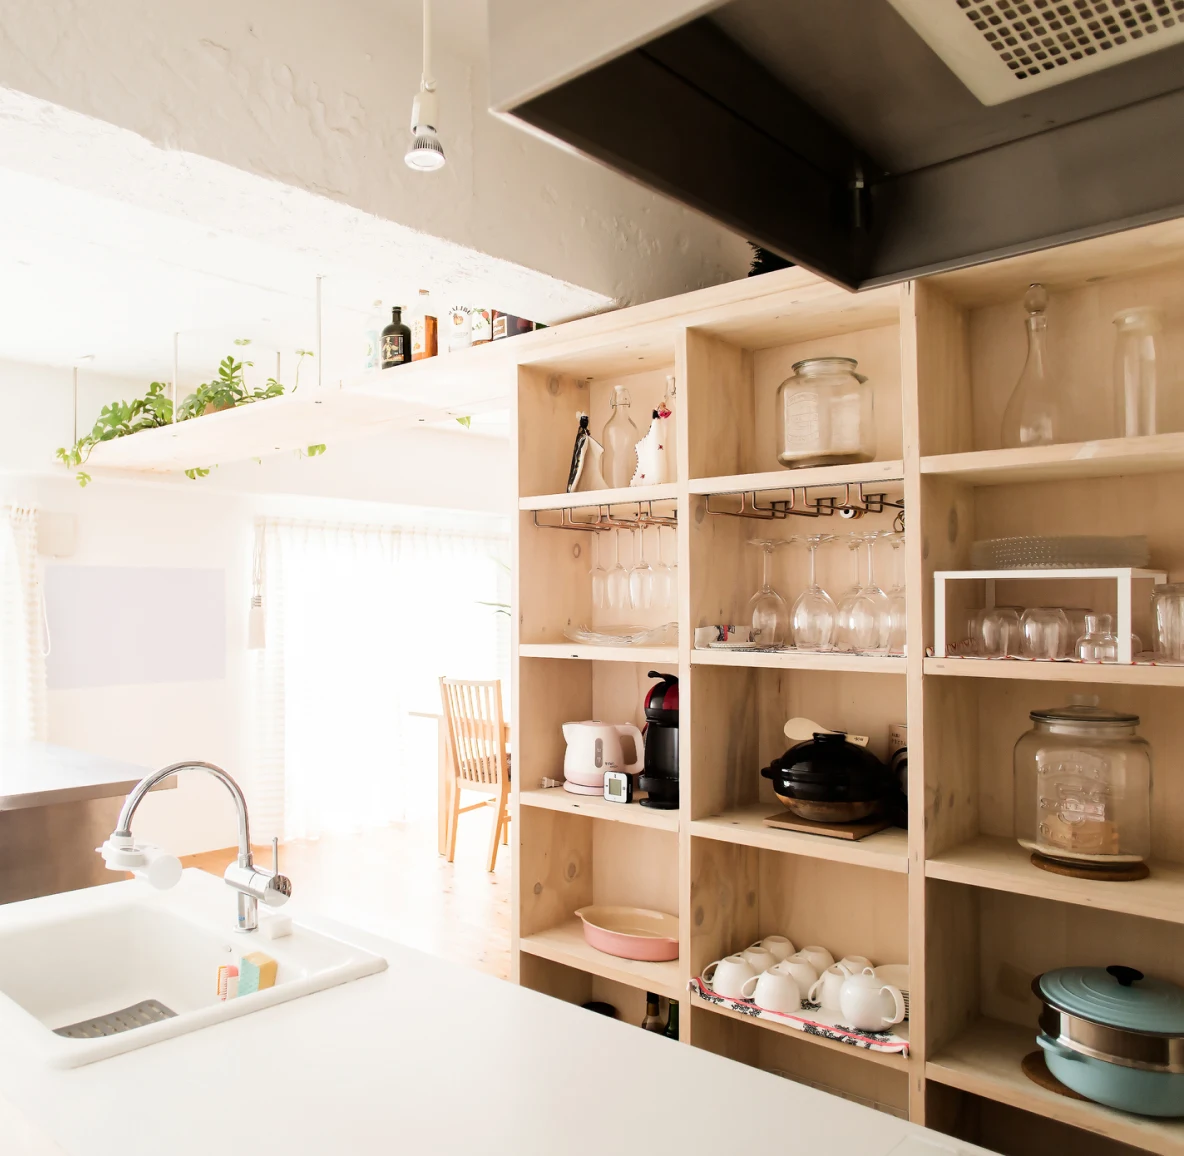 A wall of wood shelves in a brightly lit kitchen